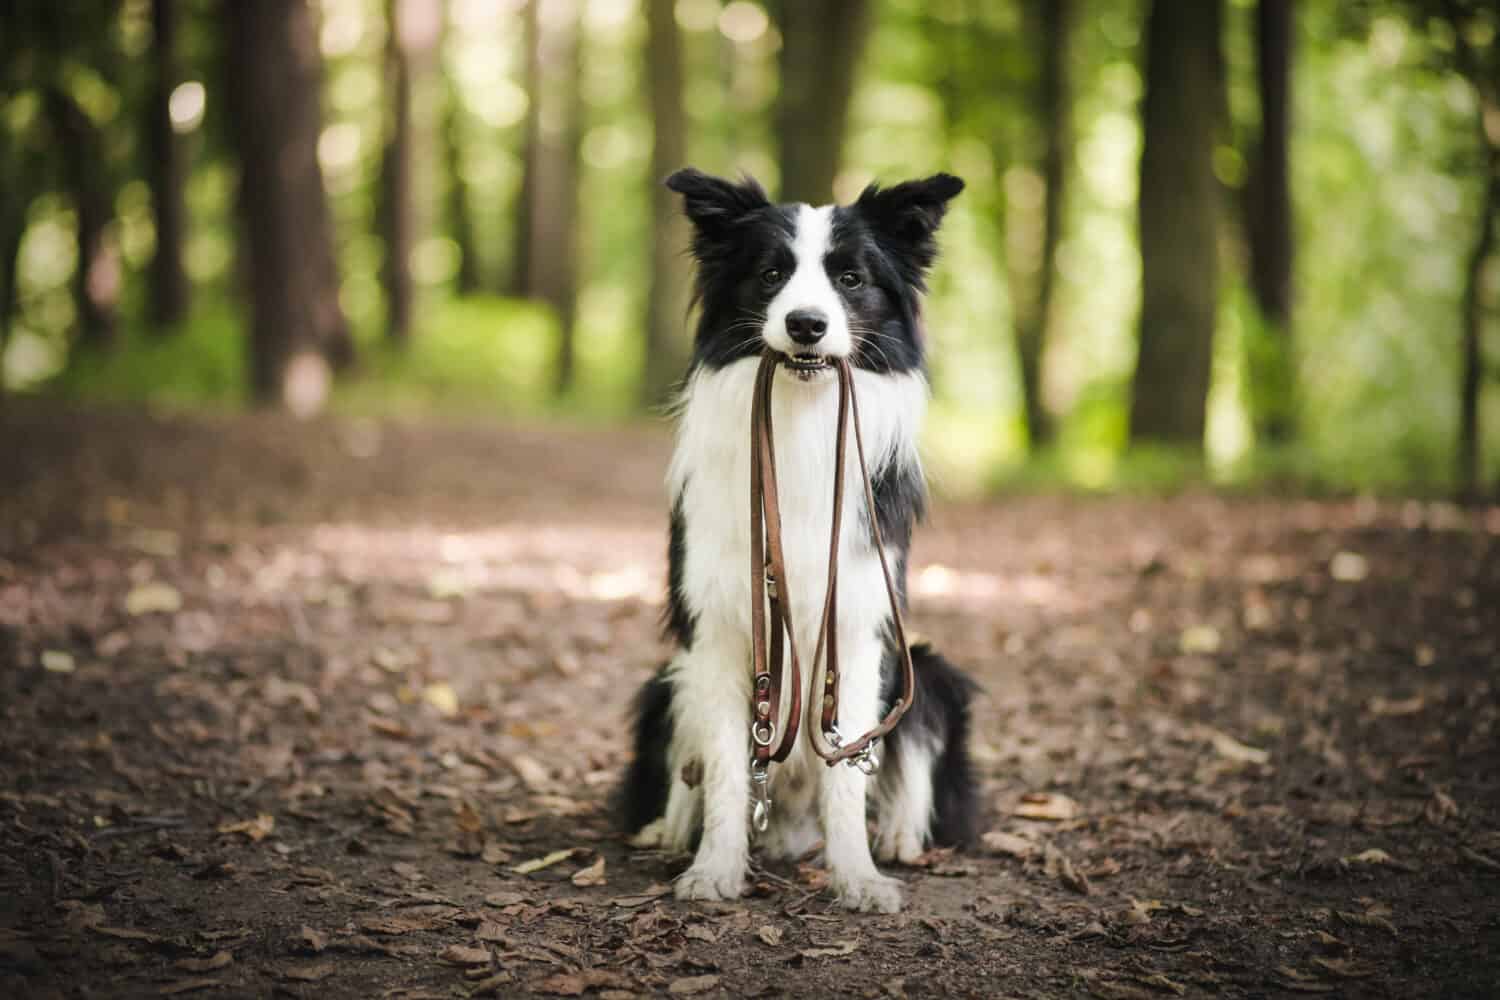 Smart border collie in the forest obediently waiting for their owner. 